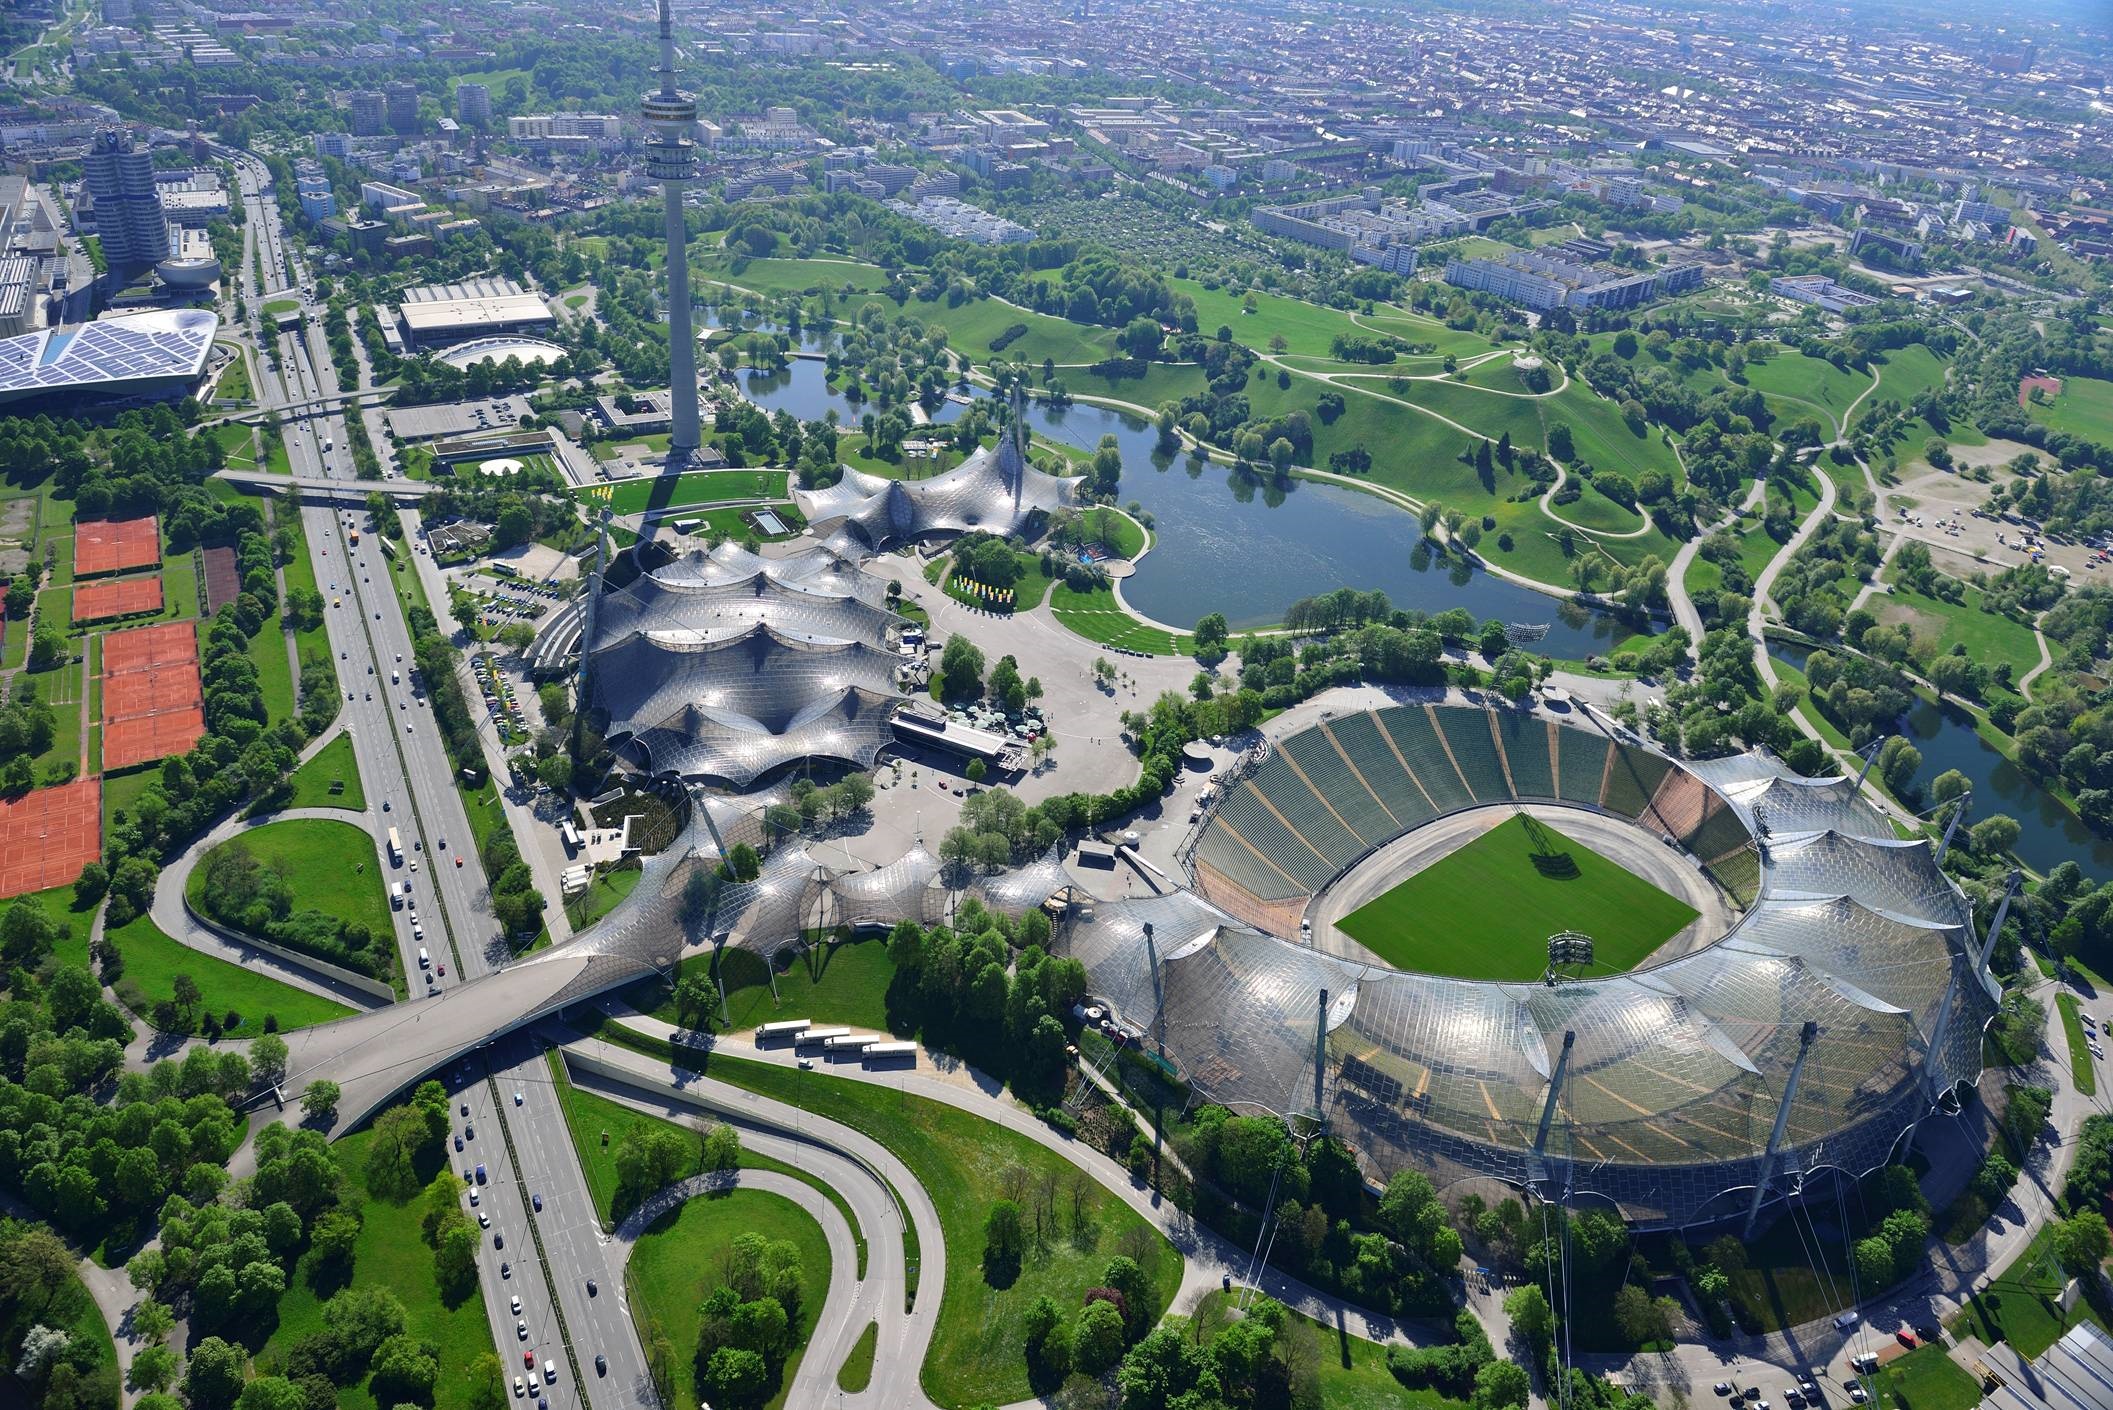 Olympiapark - 15 Unmissable things to do in Munich